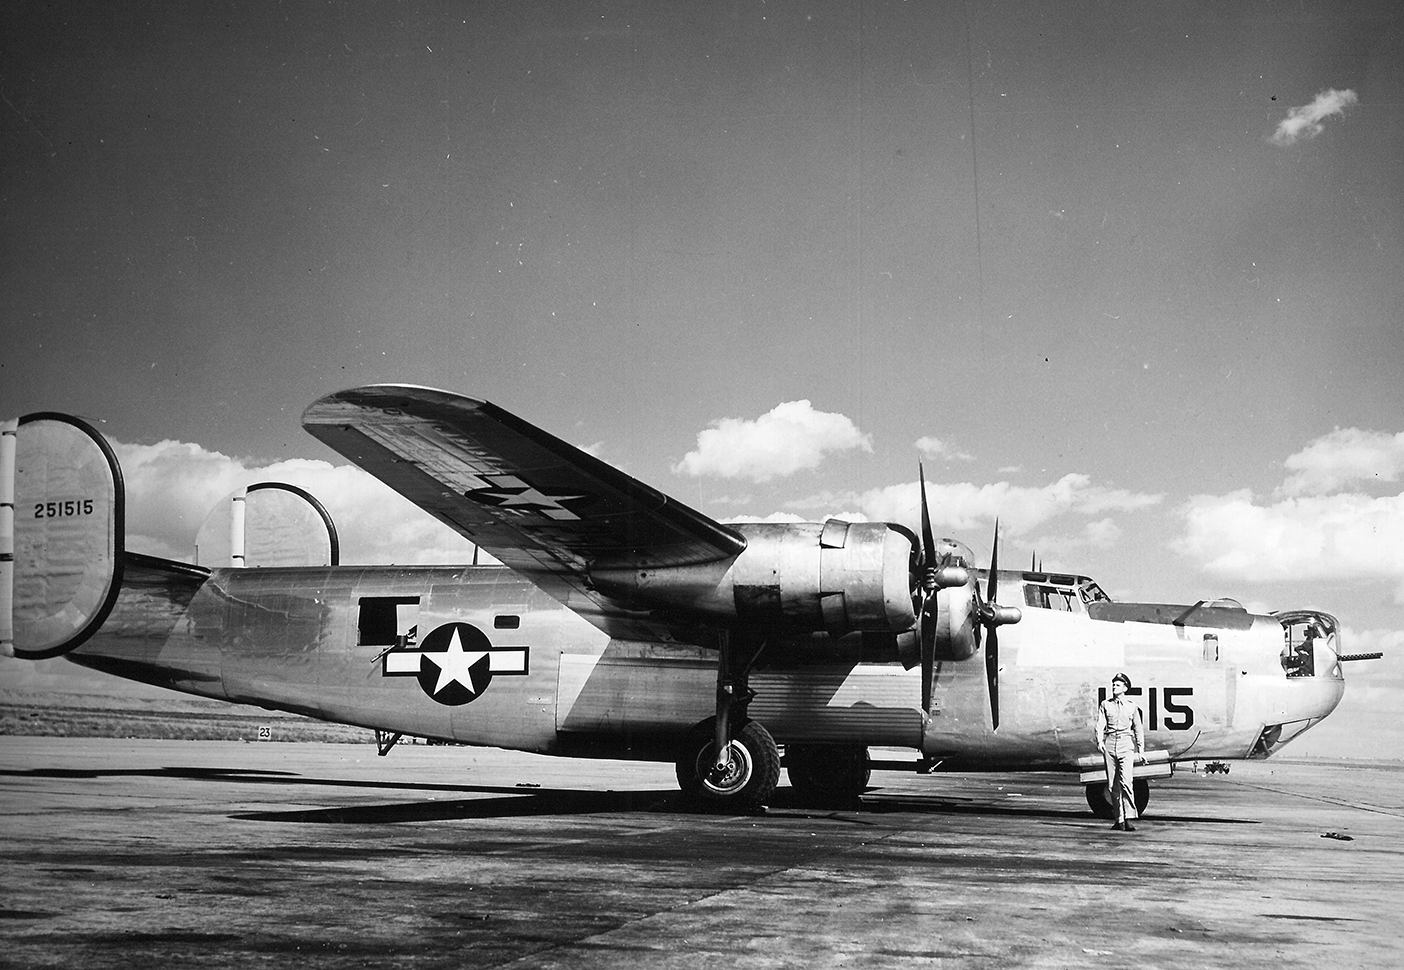 Photo of B-24 Liberator airplane, Army Air Force Base and Ordinance Depot, Pueblo